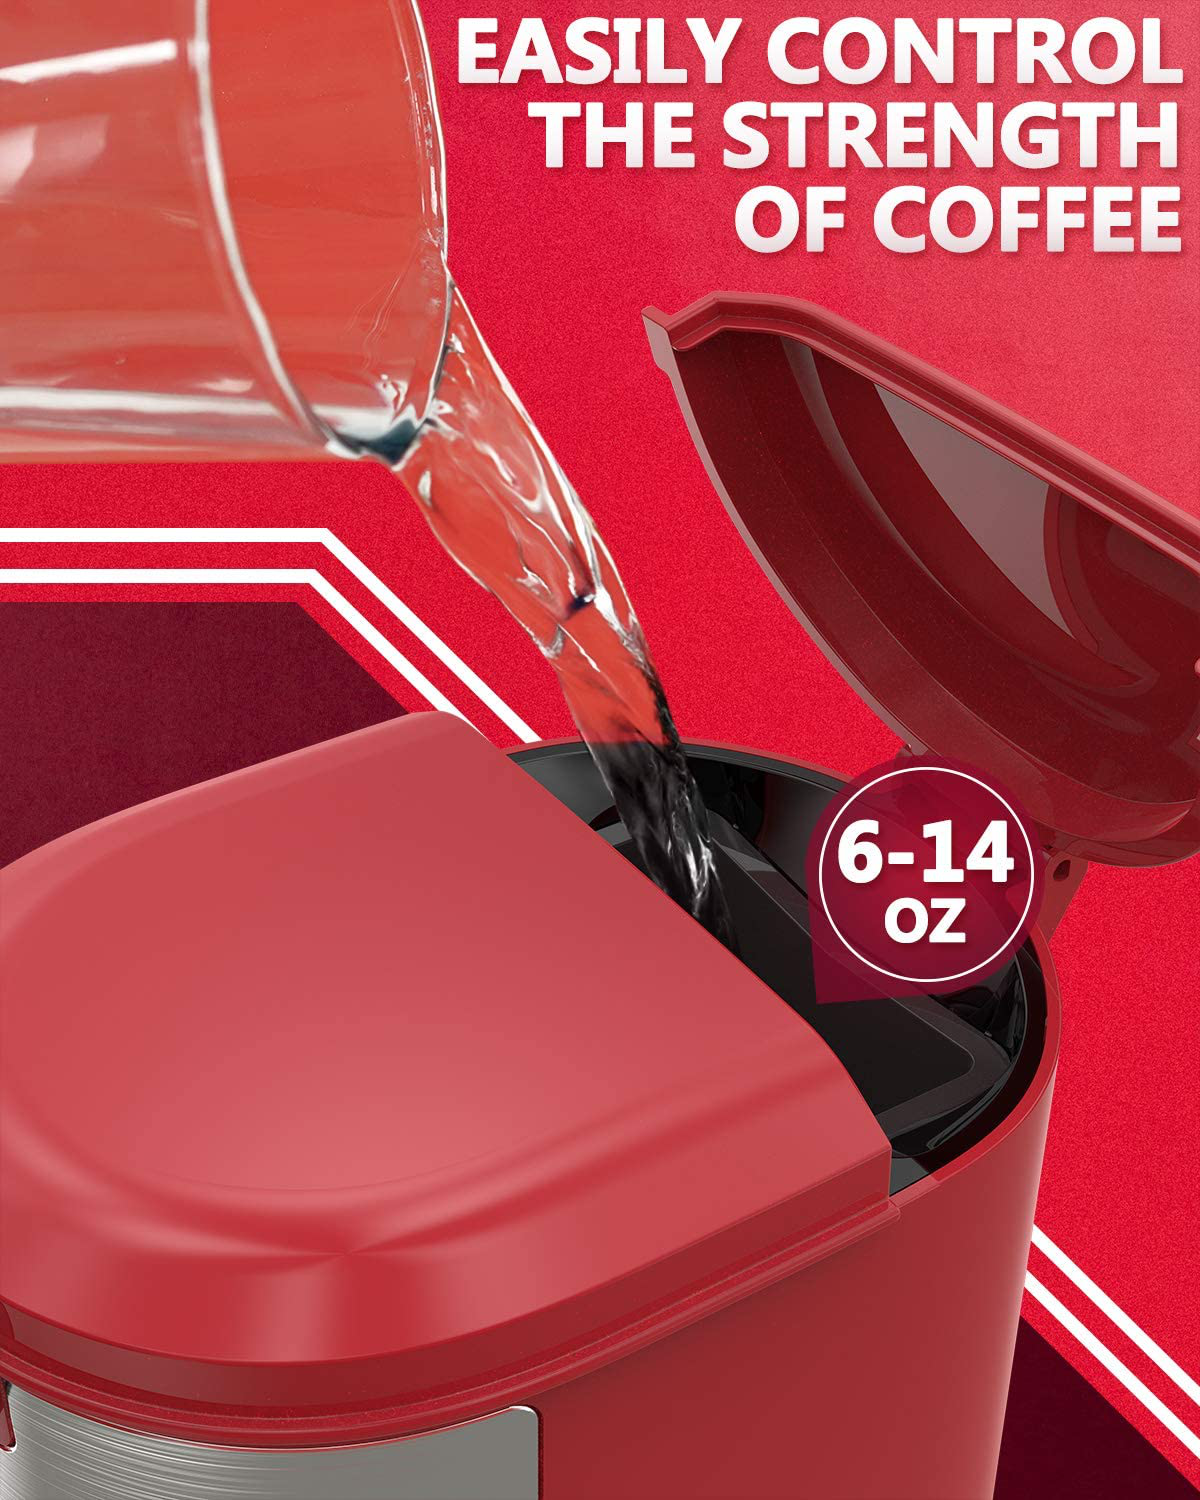 Single Serve Coffee Maker, Coffee Maker for K-Cup Pod & Ground Coffee, 2 IN 1 Strength-Controlled and Self Cleaning Function, KINGTOO Coffee Machine with 6 to 14 oz Brew Sizes (Red)